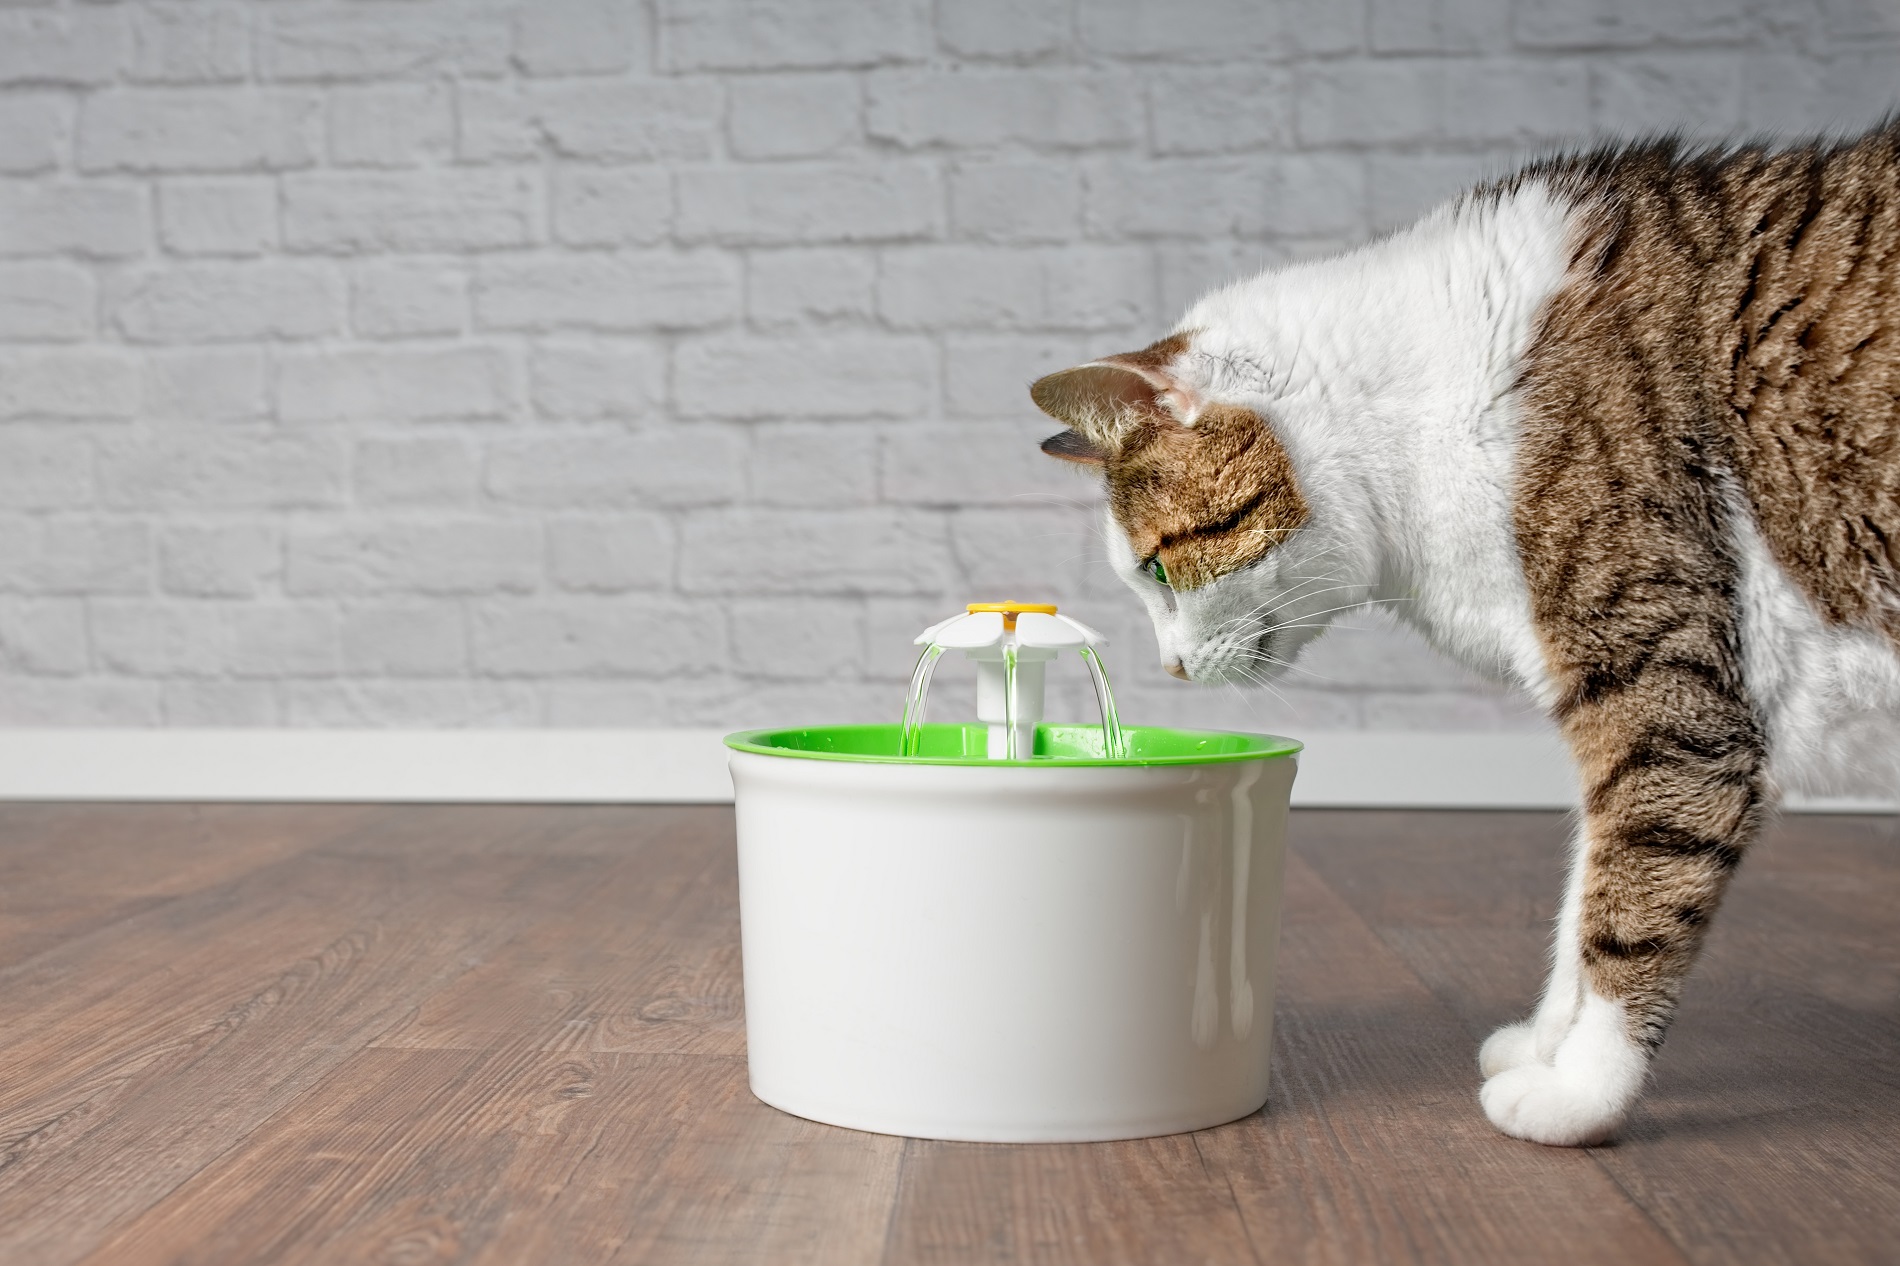 Thirsty tabby cat drinking water from a pet drinking fountain